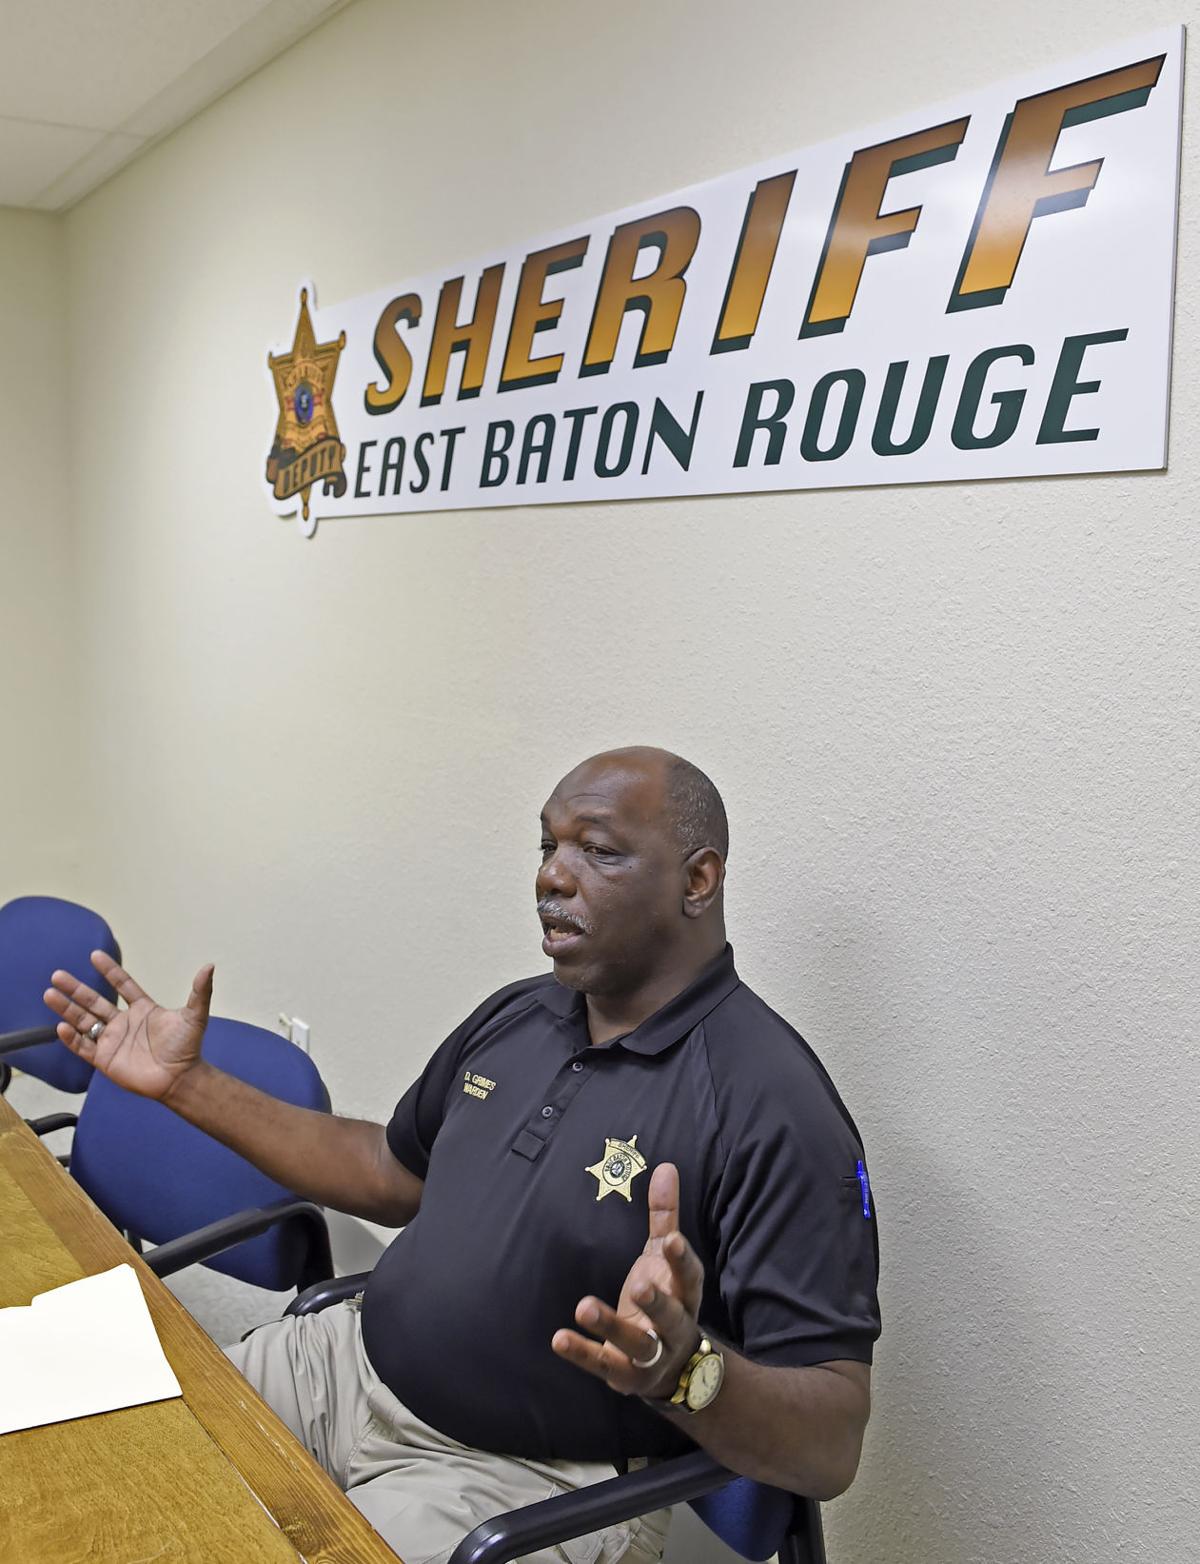 East Baton Rouge Parish jails people at rates far higher than New